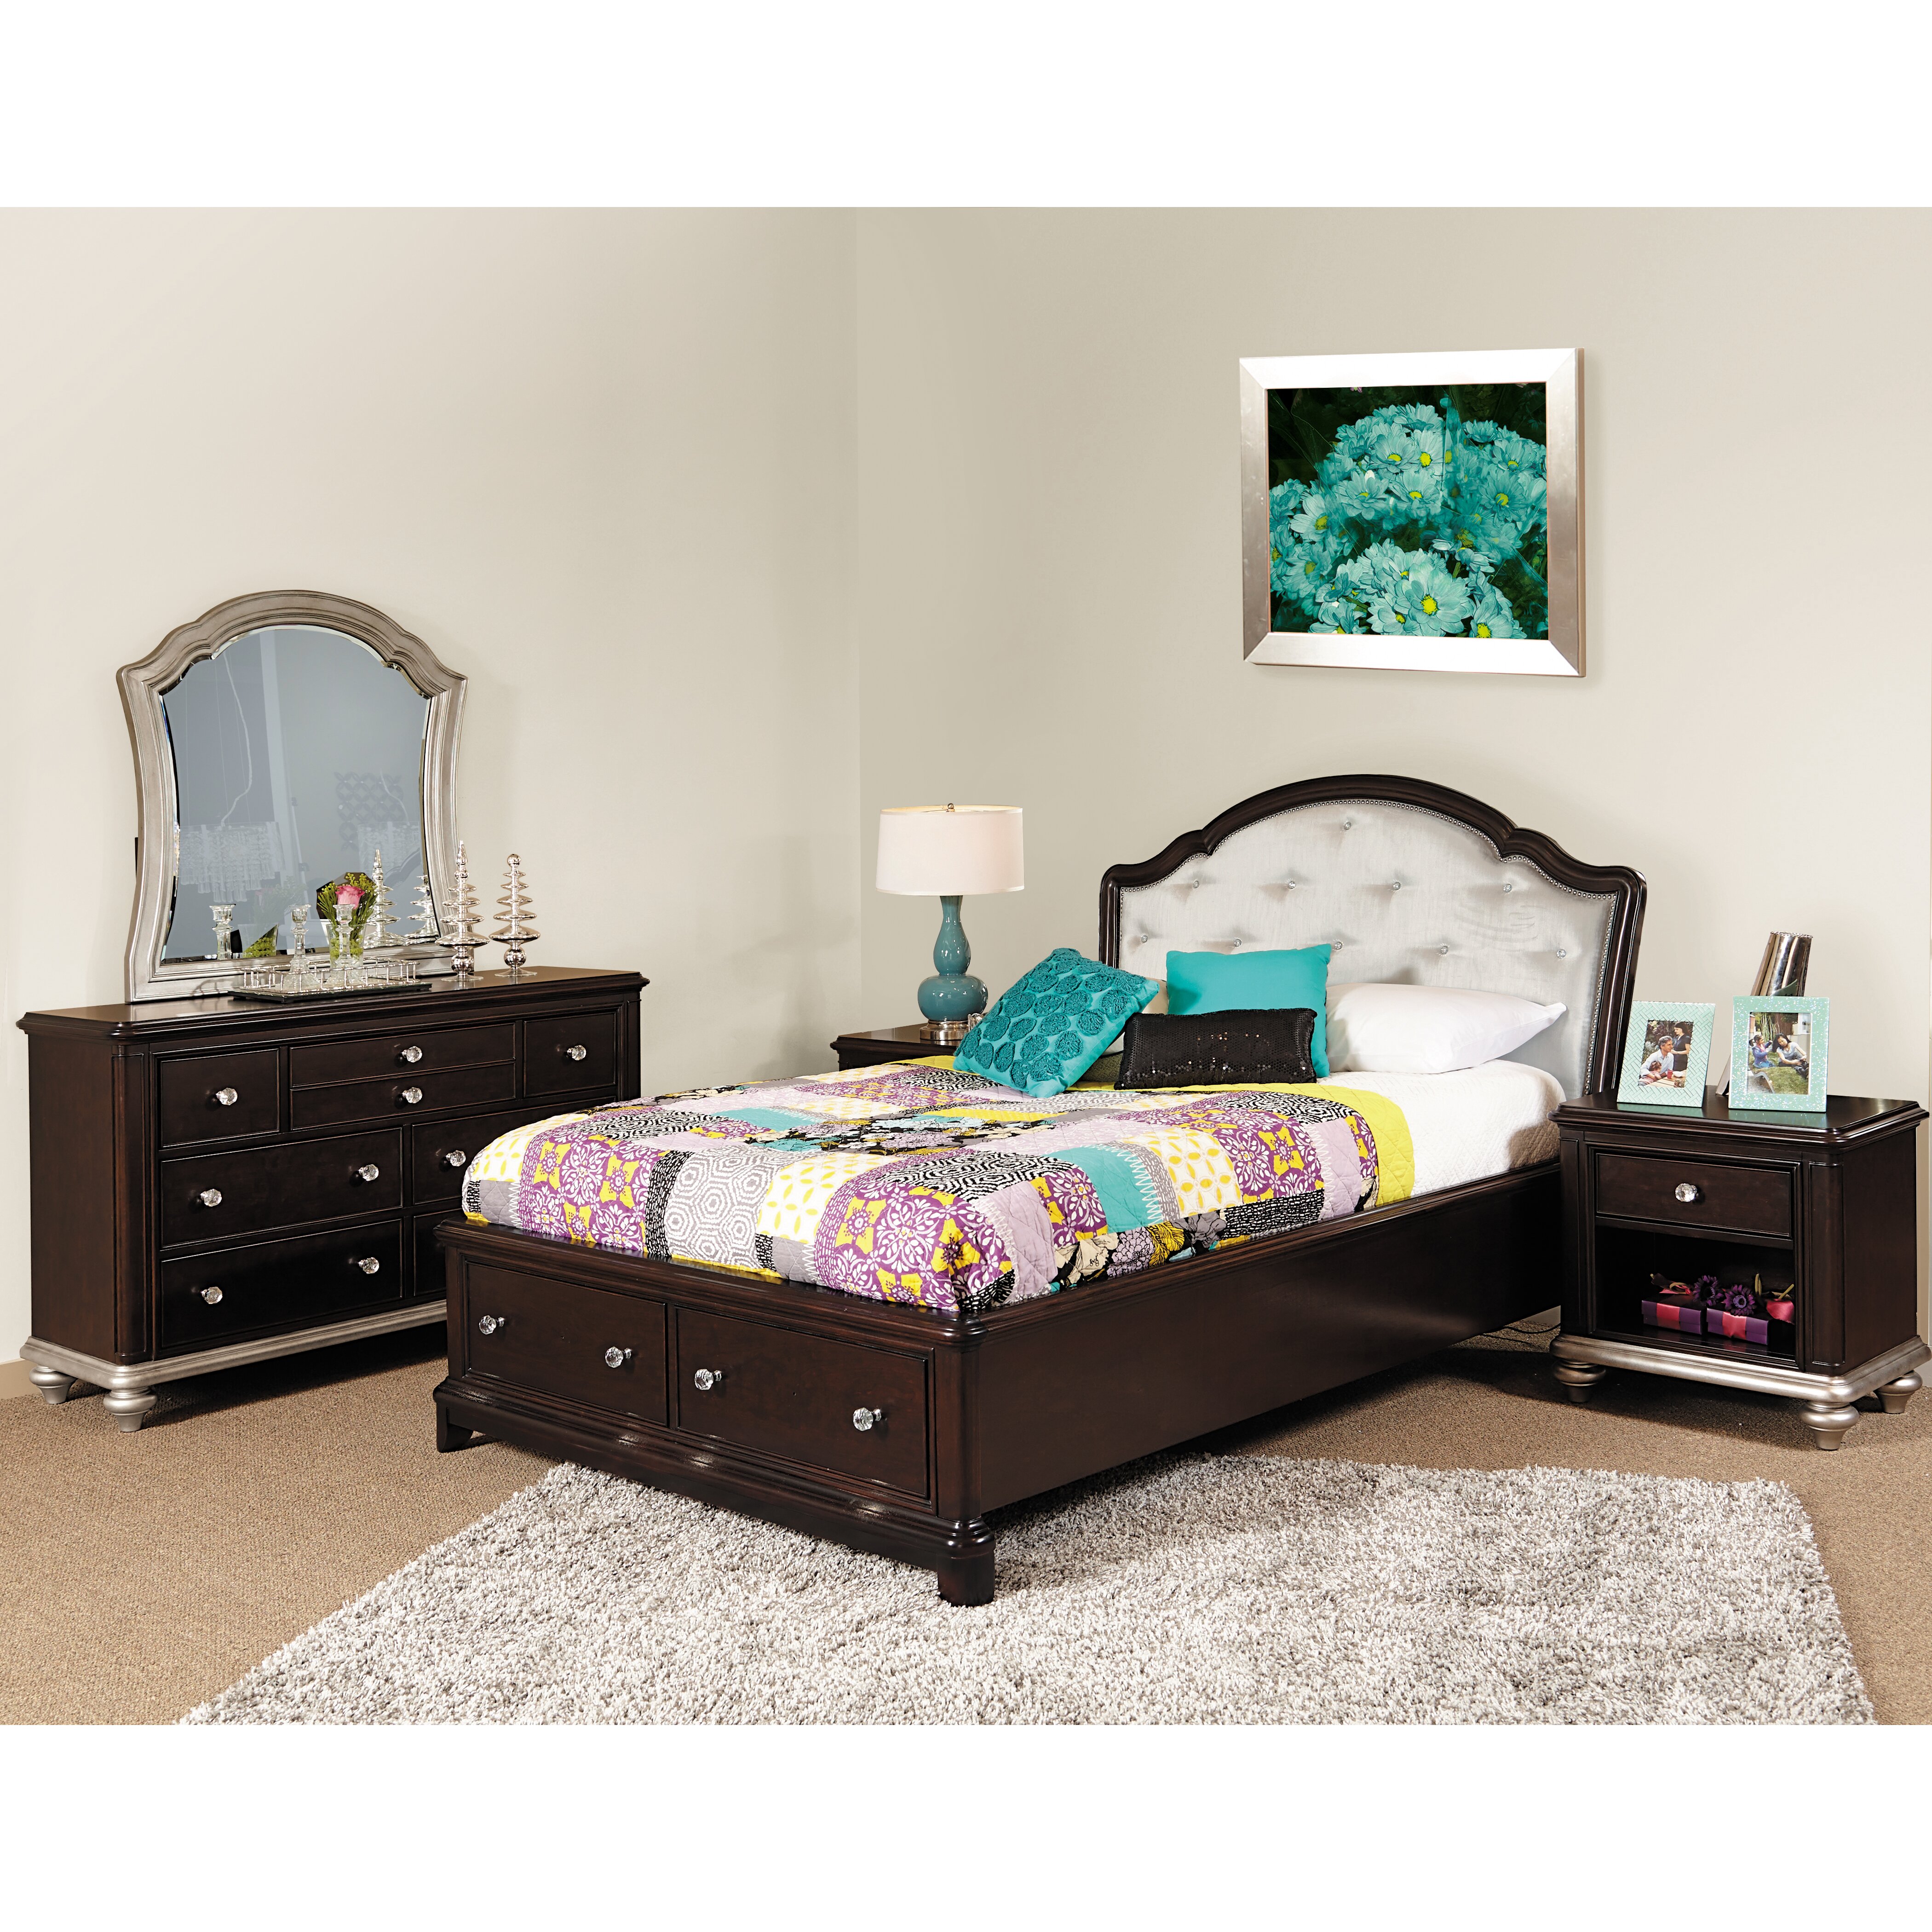 Childrens Bedroom Furniture Pay Monthly(31).jpg